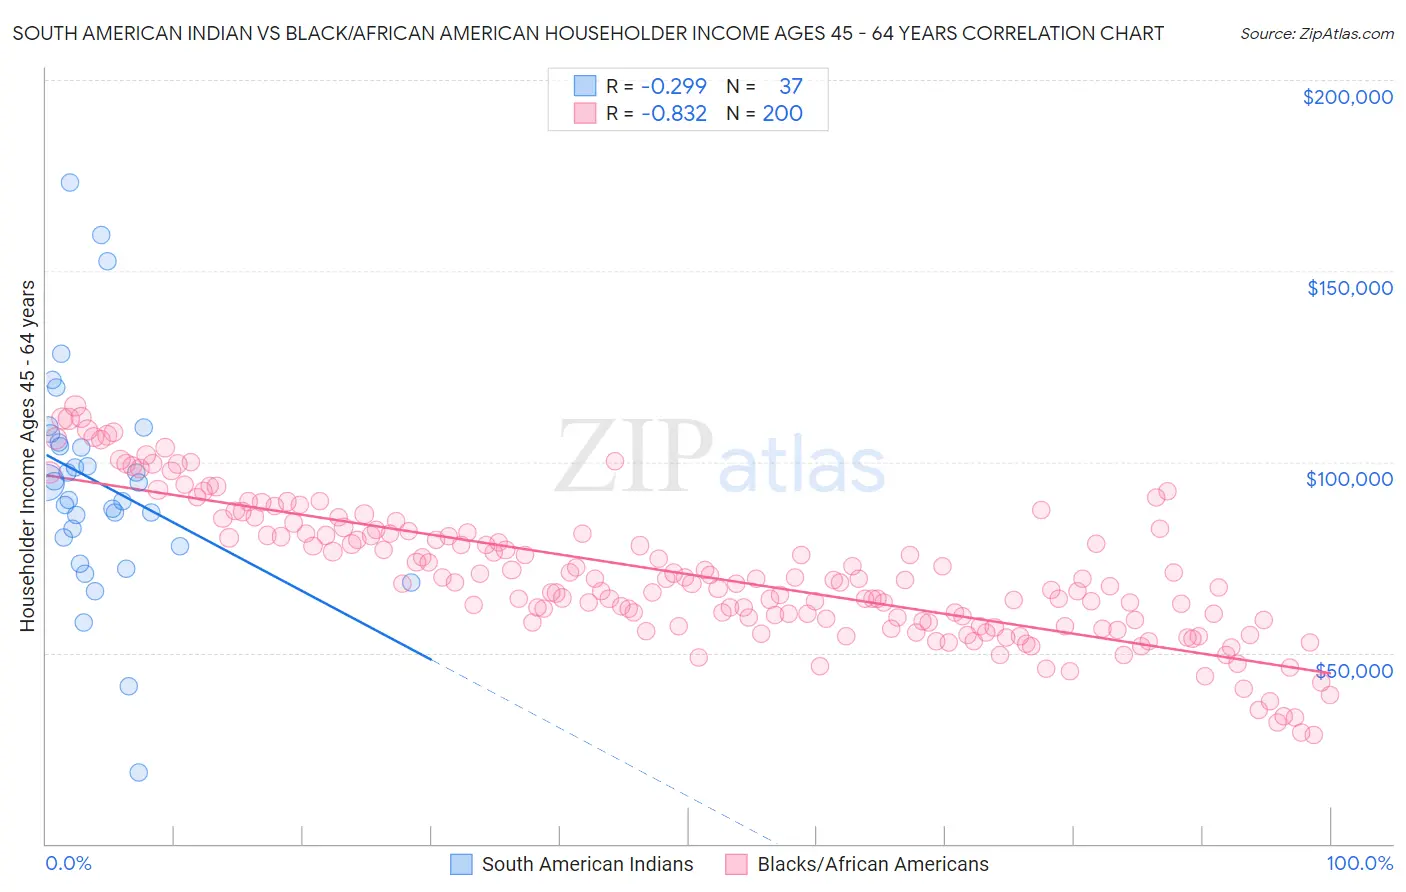 South American Indian vs Black/African American Householder Income Ages 45 - 64 years